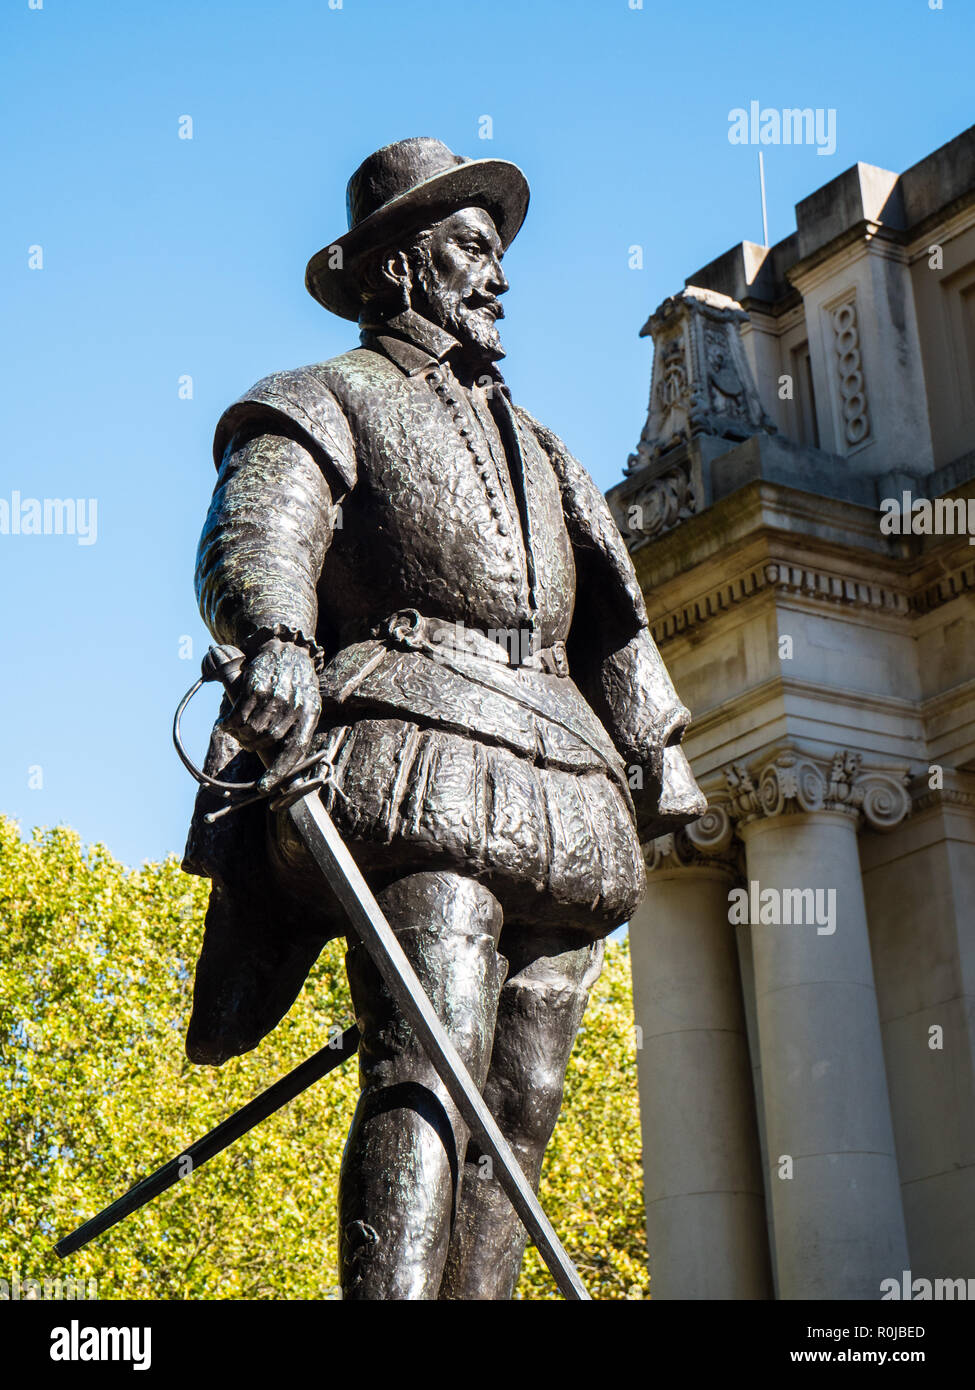 Statue de Sir Walter Raleigh, Old Royal Naval College Centre Architectural, Greenwich, London, England, UK, FR. Banque D'Images